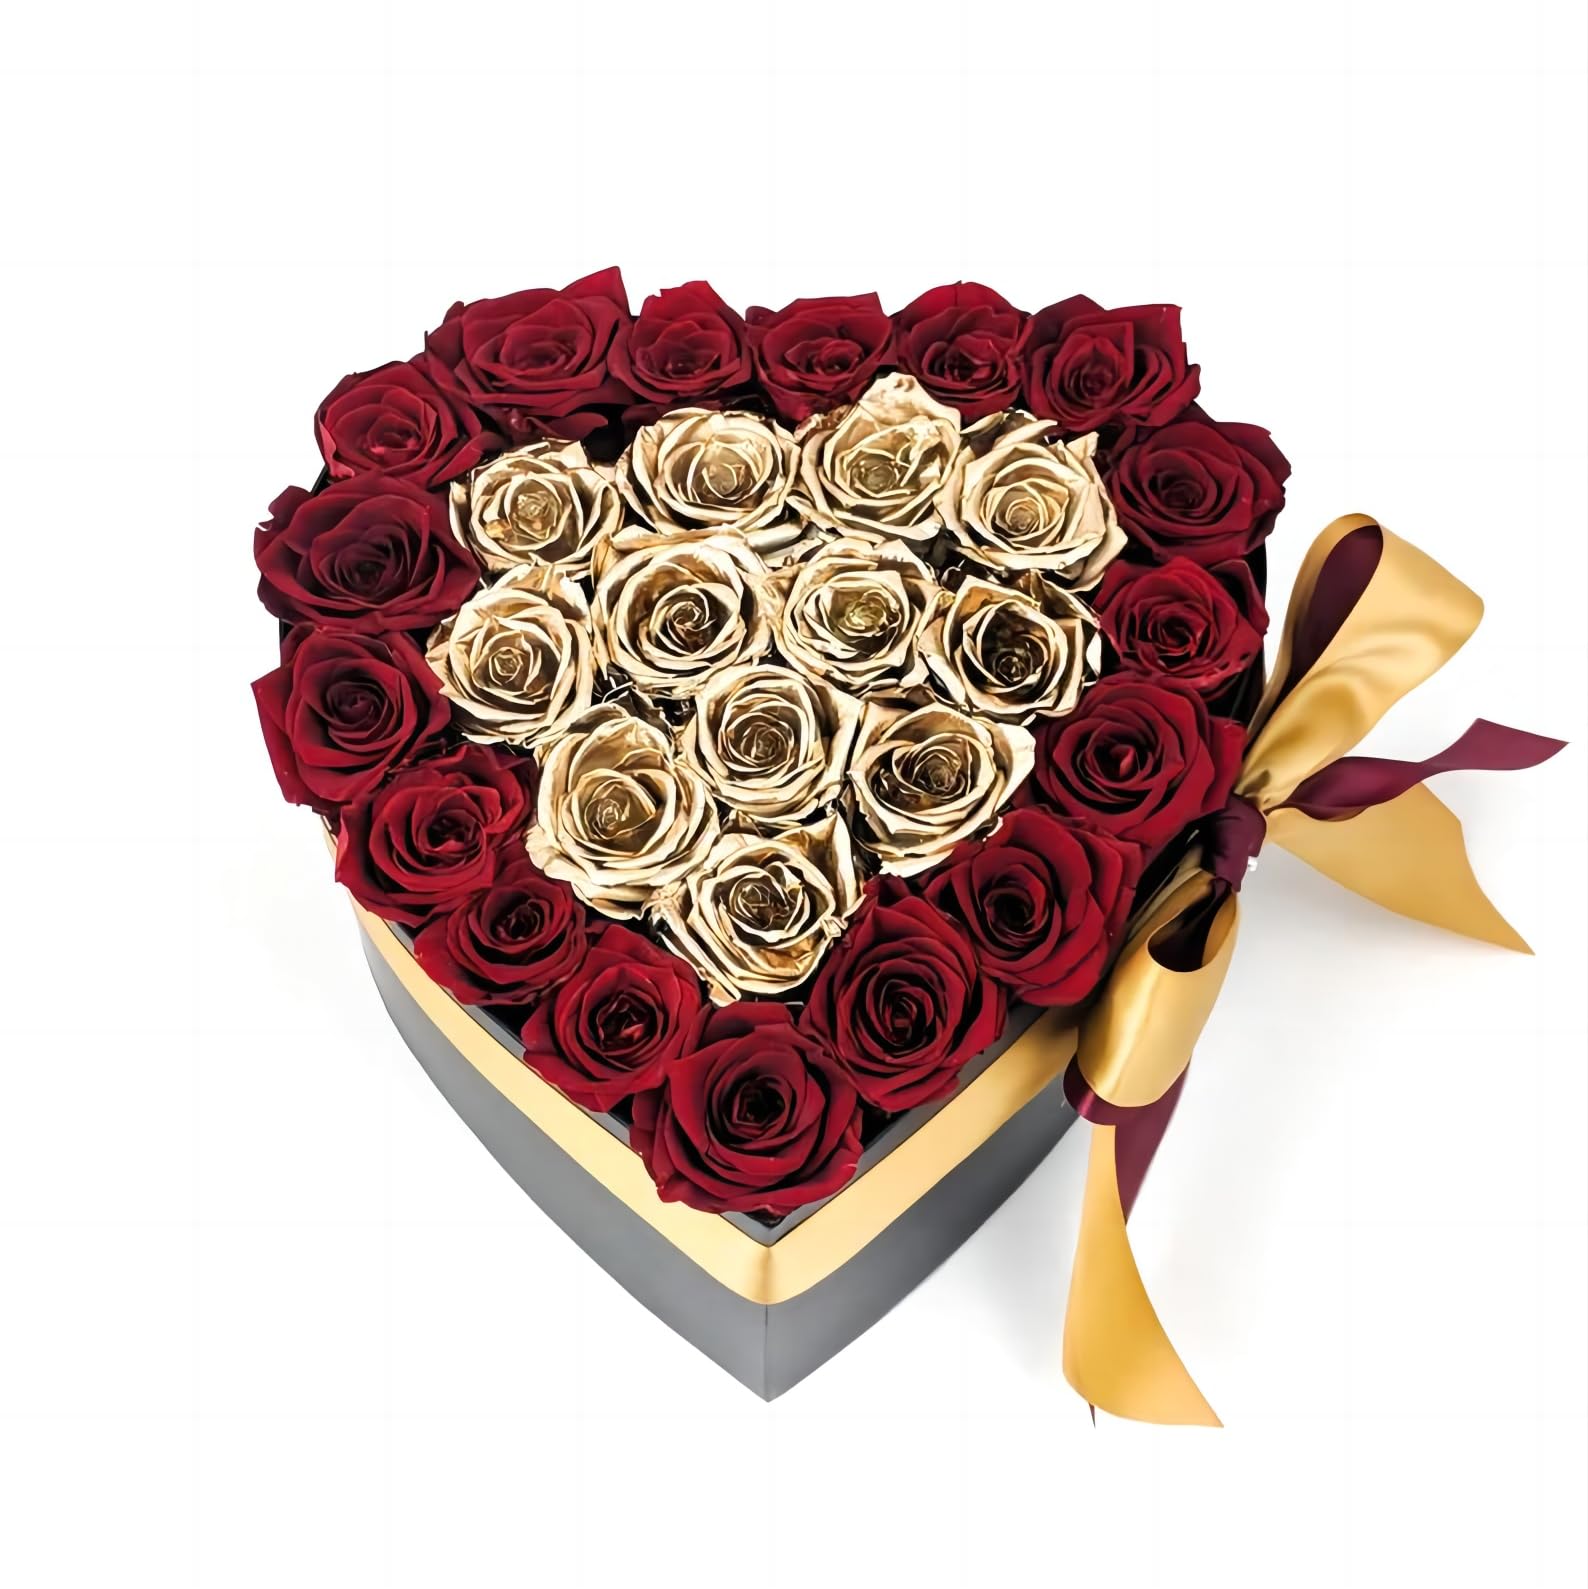 Valentine's Day Heart Floral Boxes Preserved Rose Flowers I Love You Rose Box Heart Shaped Boxes for Roses